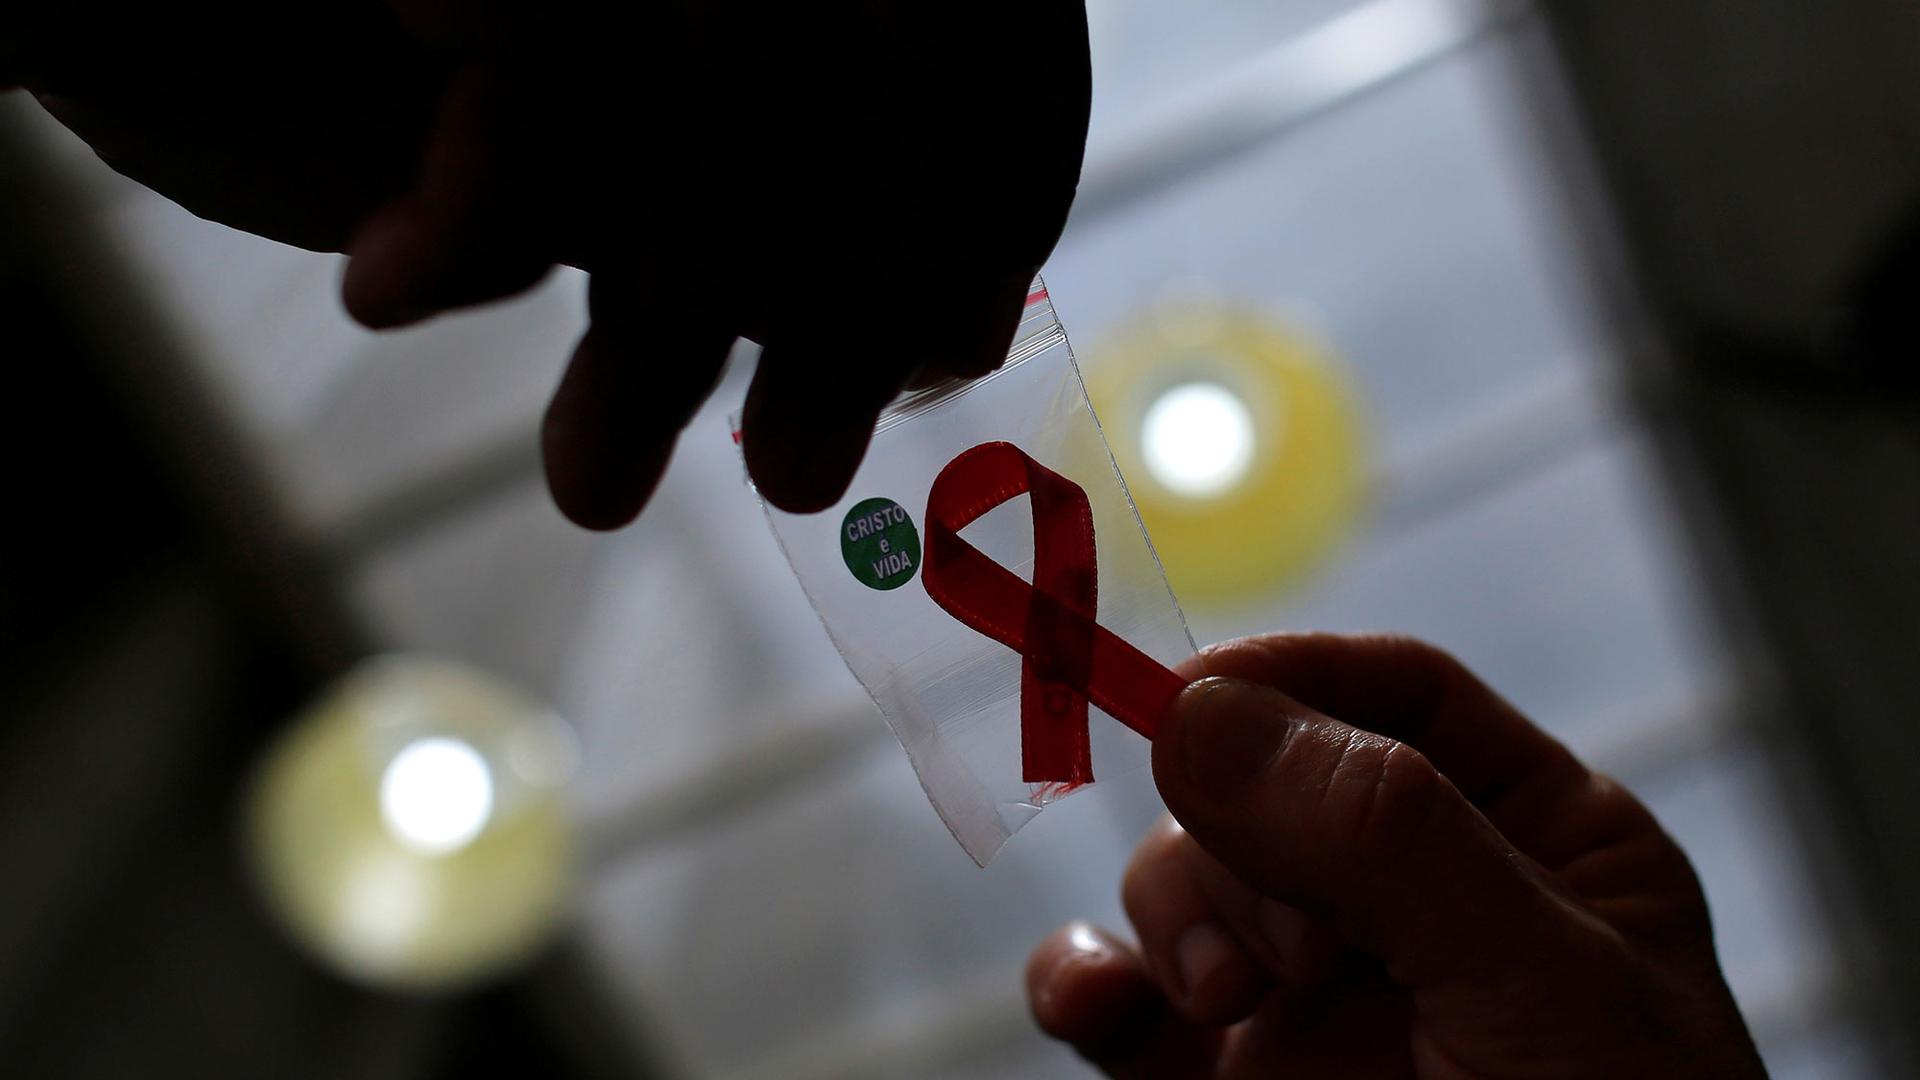 In a picture photographed from underneath, an AIDs ribon is shown in a small plastic baggie in shadow.